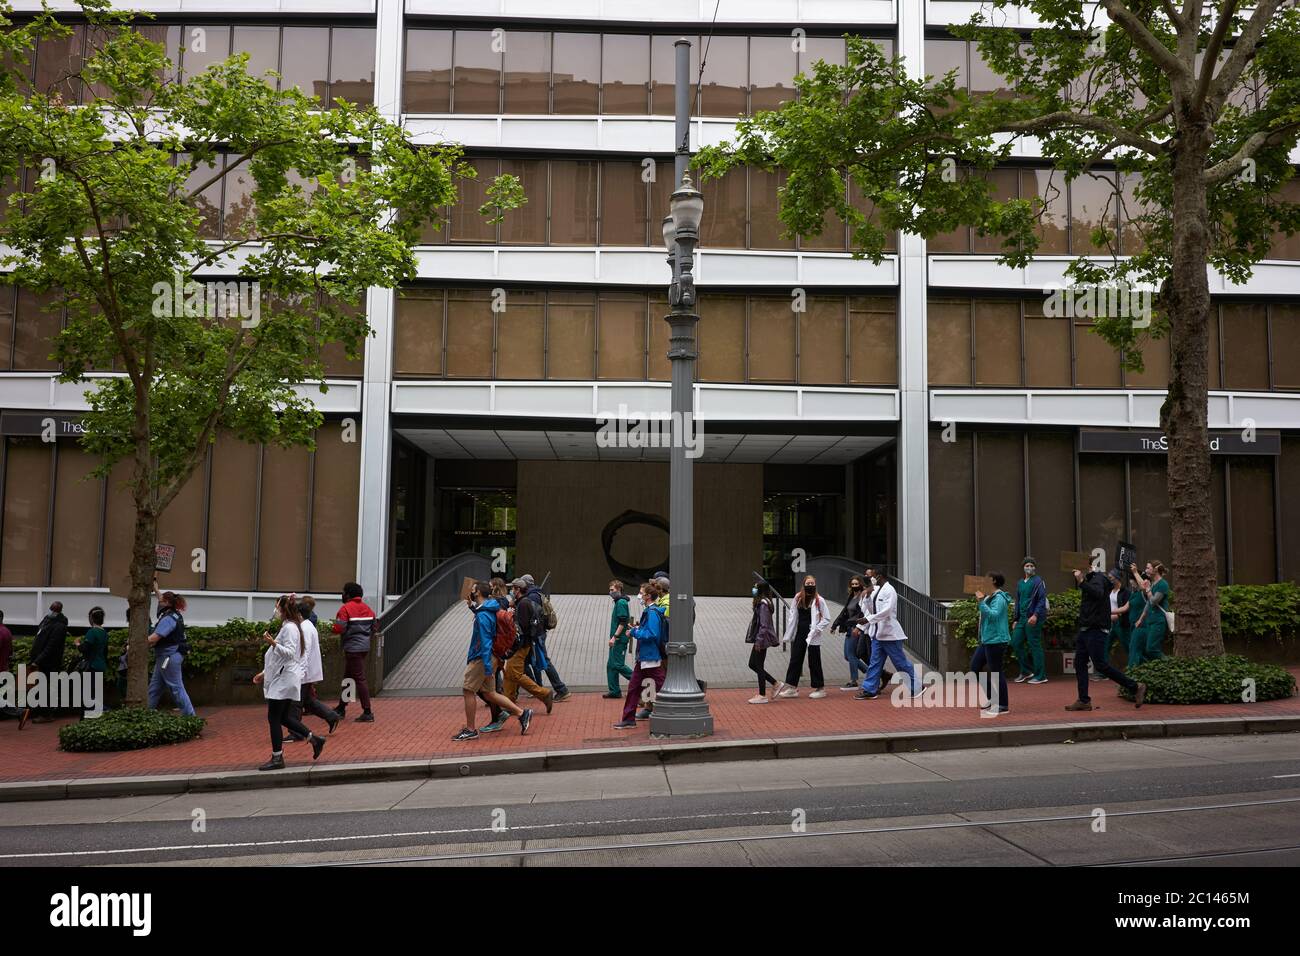 A group of BLM demonstrators, mostly young medical workers and PA students, march along the 6th Ave in downtown Portland, Ore., on Sat., Jun 13, 2020. Stock Photo